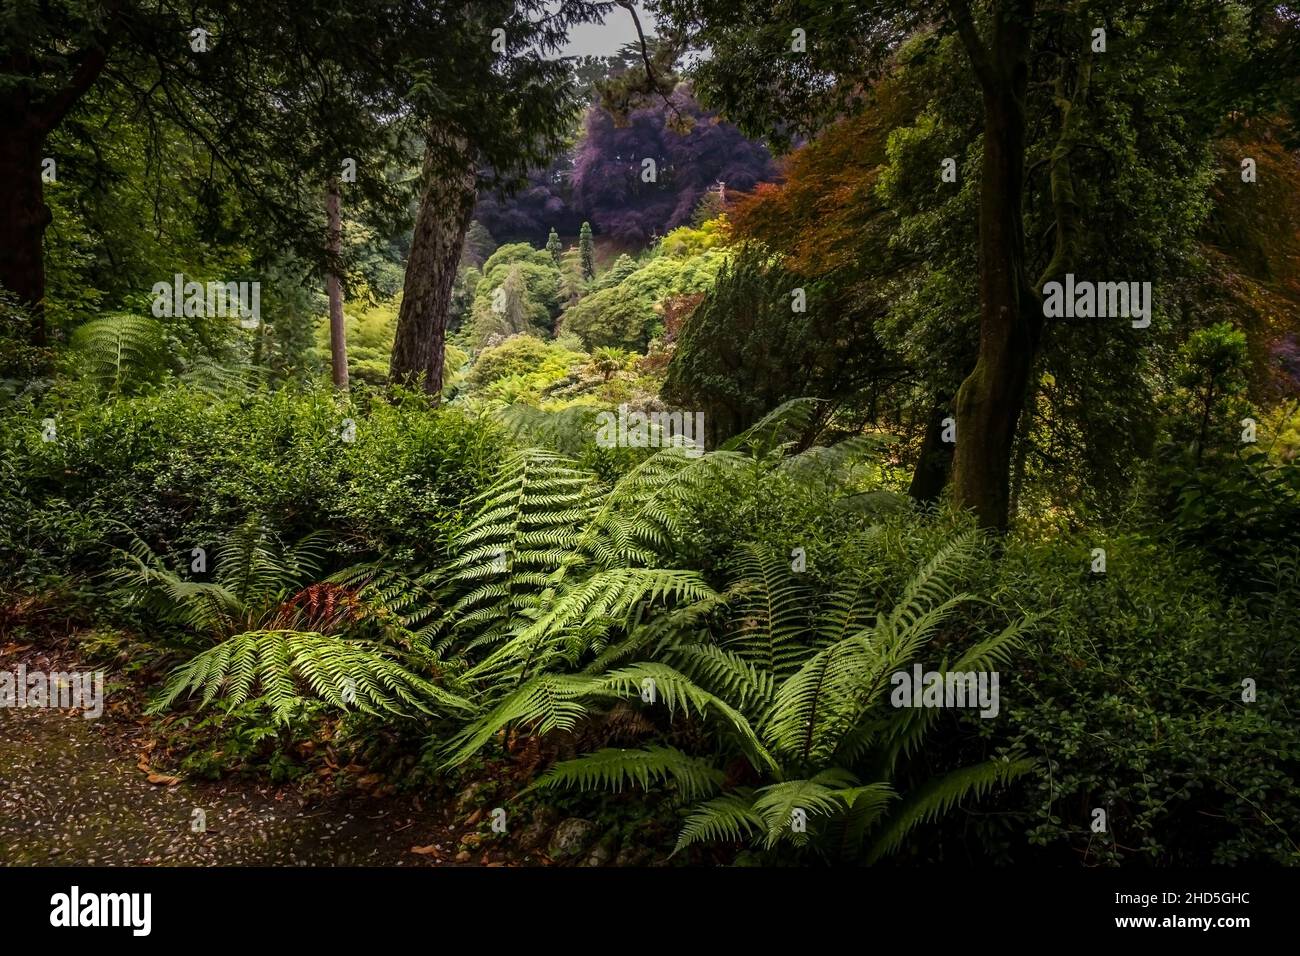 The spectacular view over the lush vegetation in the sub tropical Trebah Gardens in Cornwall. Stock Photo